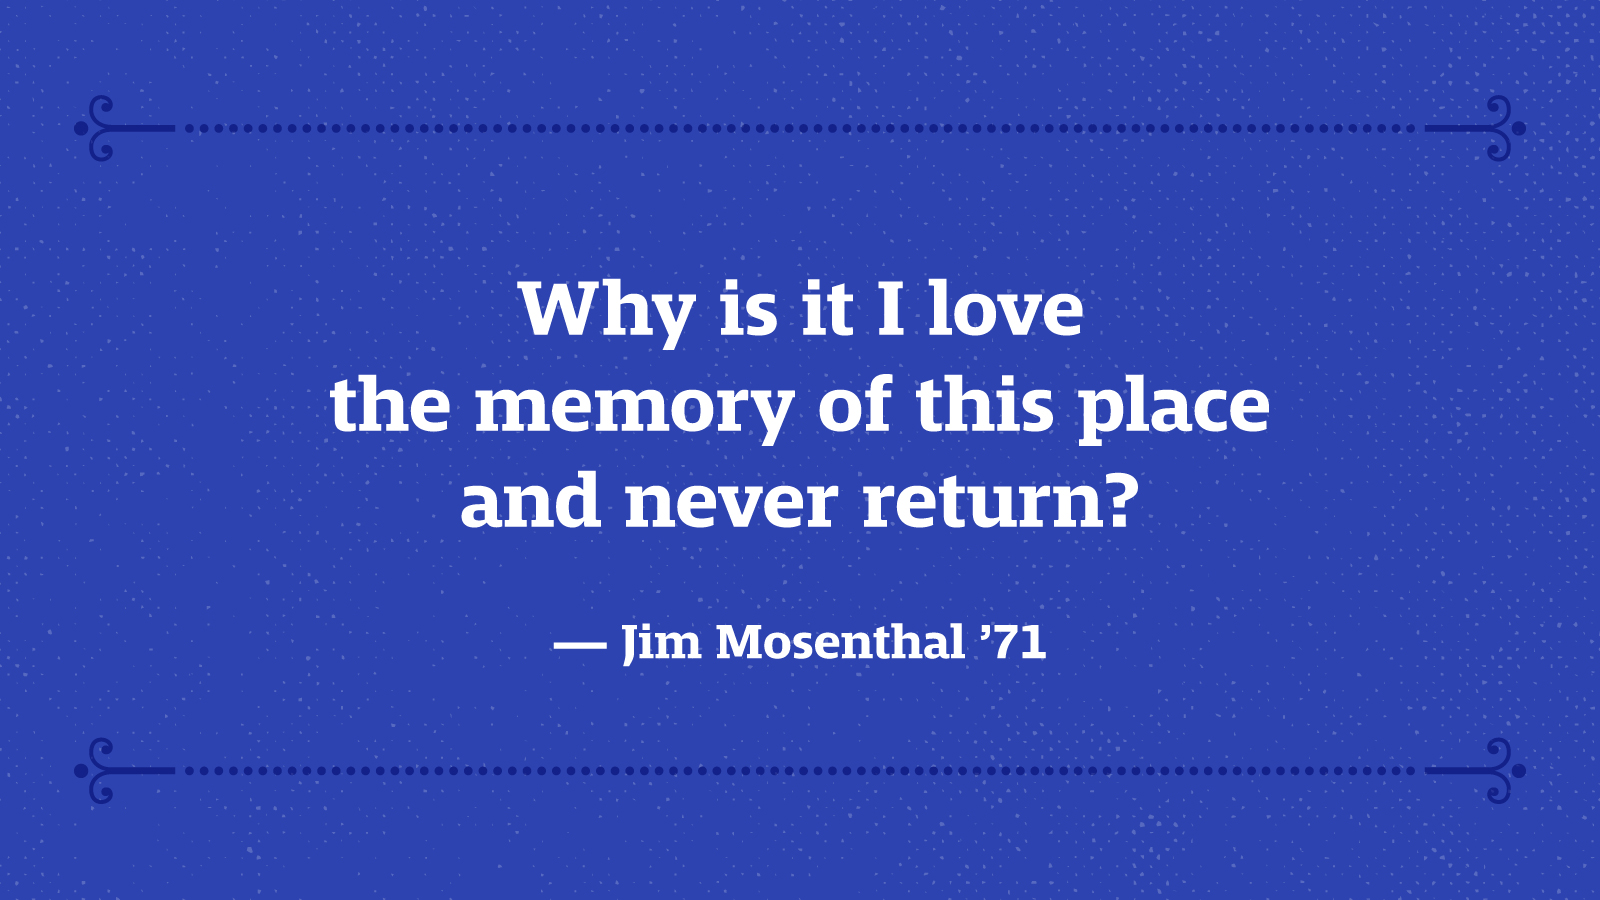 Why is it I love the memory of this place and never return? — Jim Mosenthal ’71